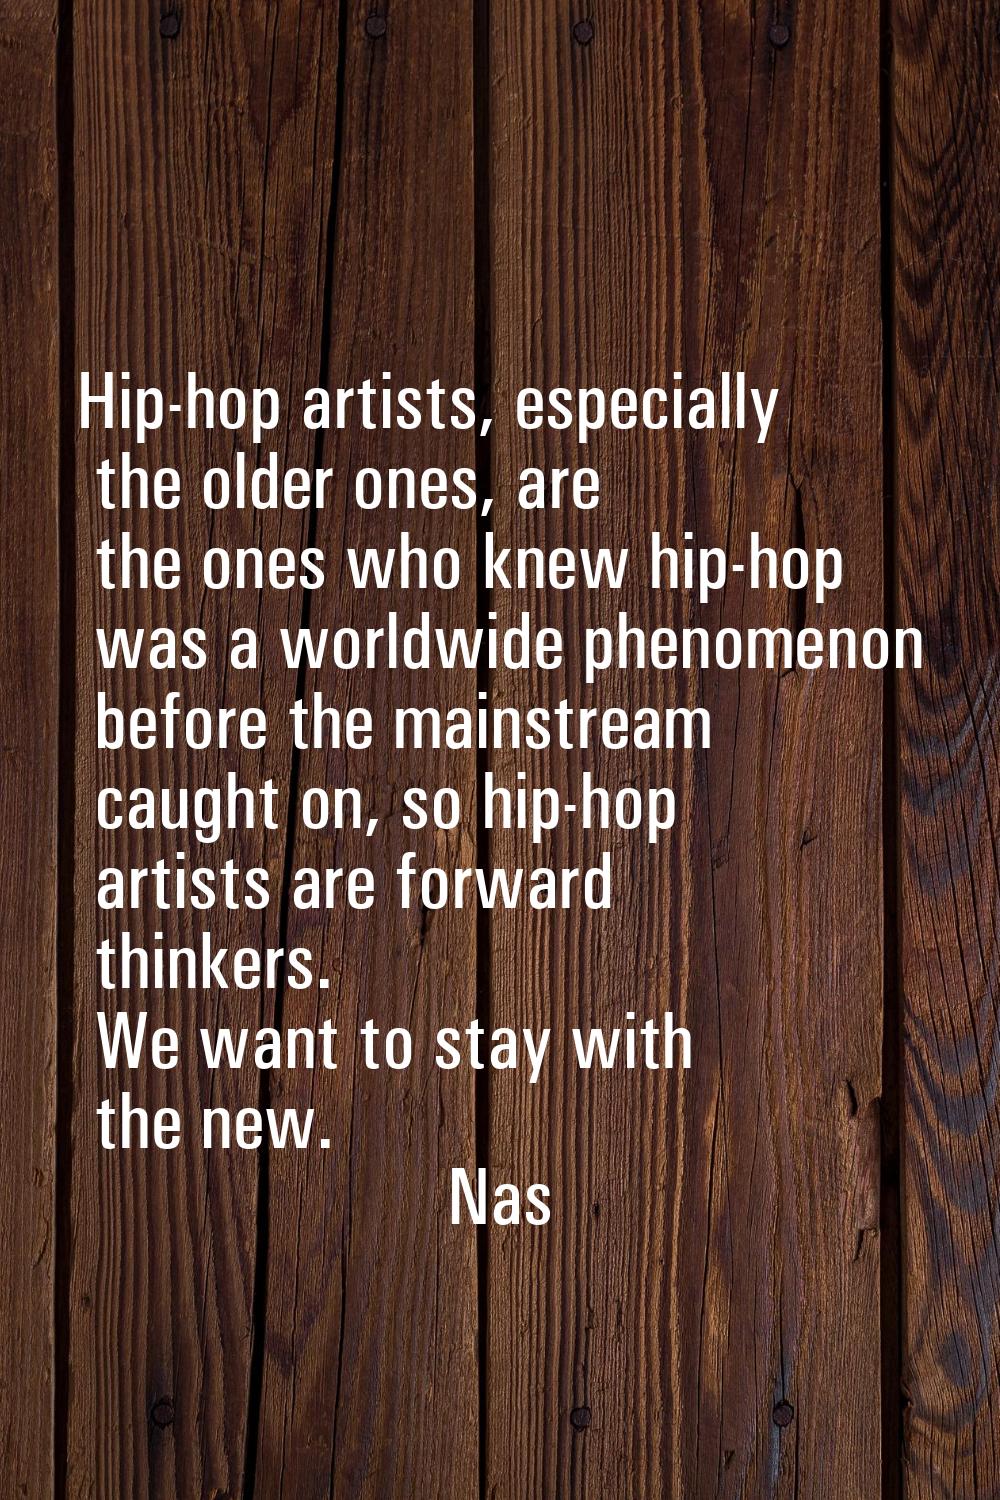 Hip-hop artists, especially the older ones, are the ones who knew hip-hop was a worldwide phenomeno